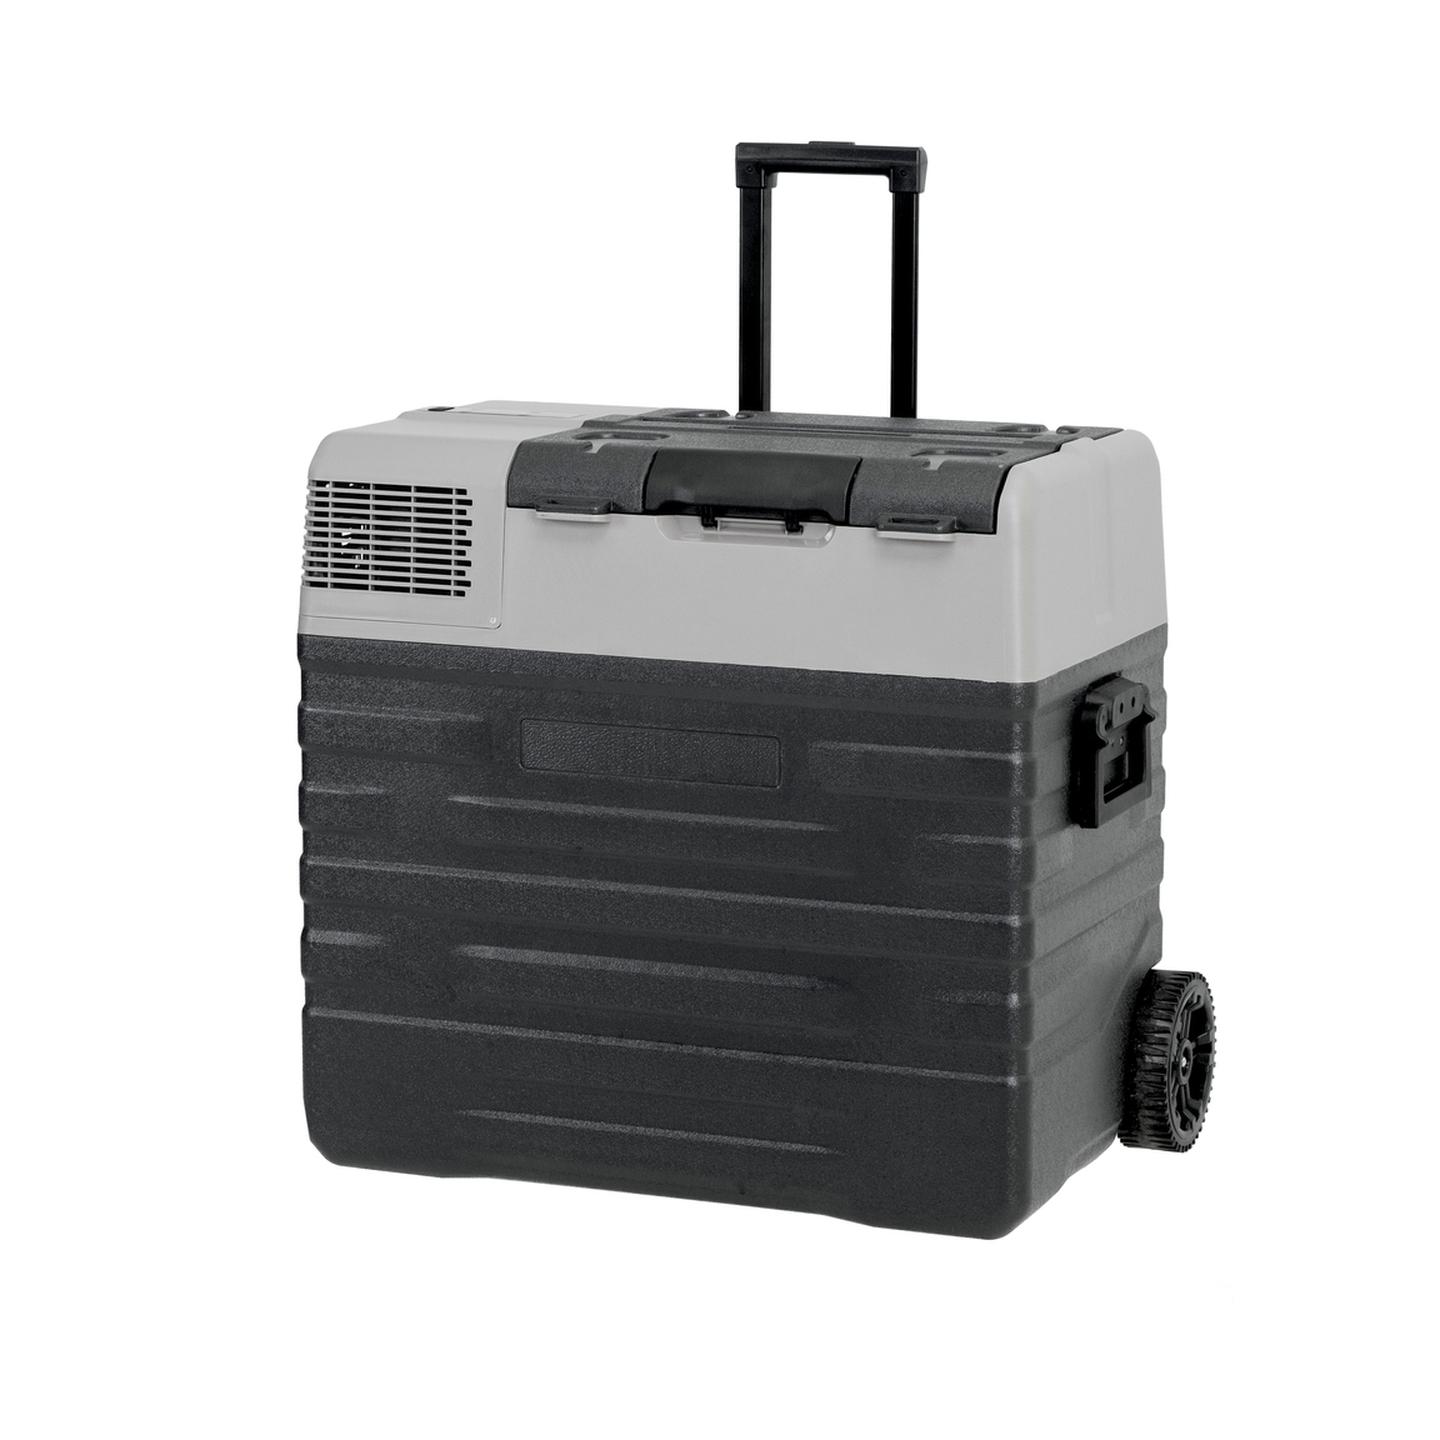 52L Brass Monkey Ultra-Portable Fridge/Freezer with Wheels and Battery Compartment